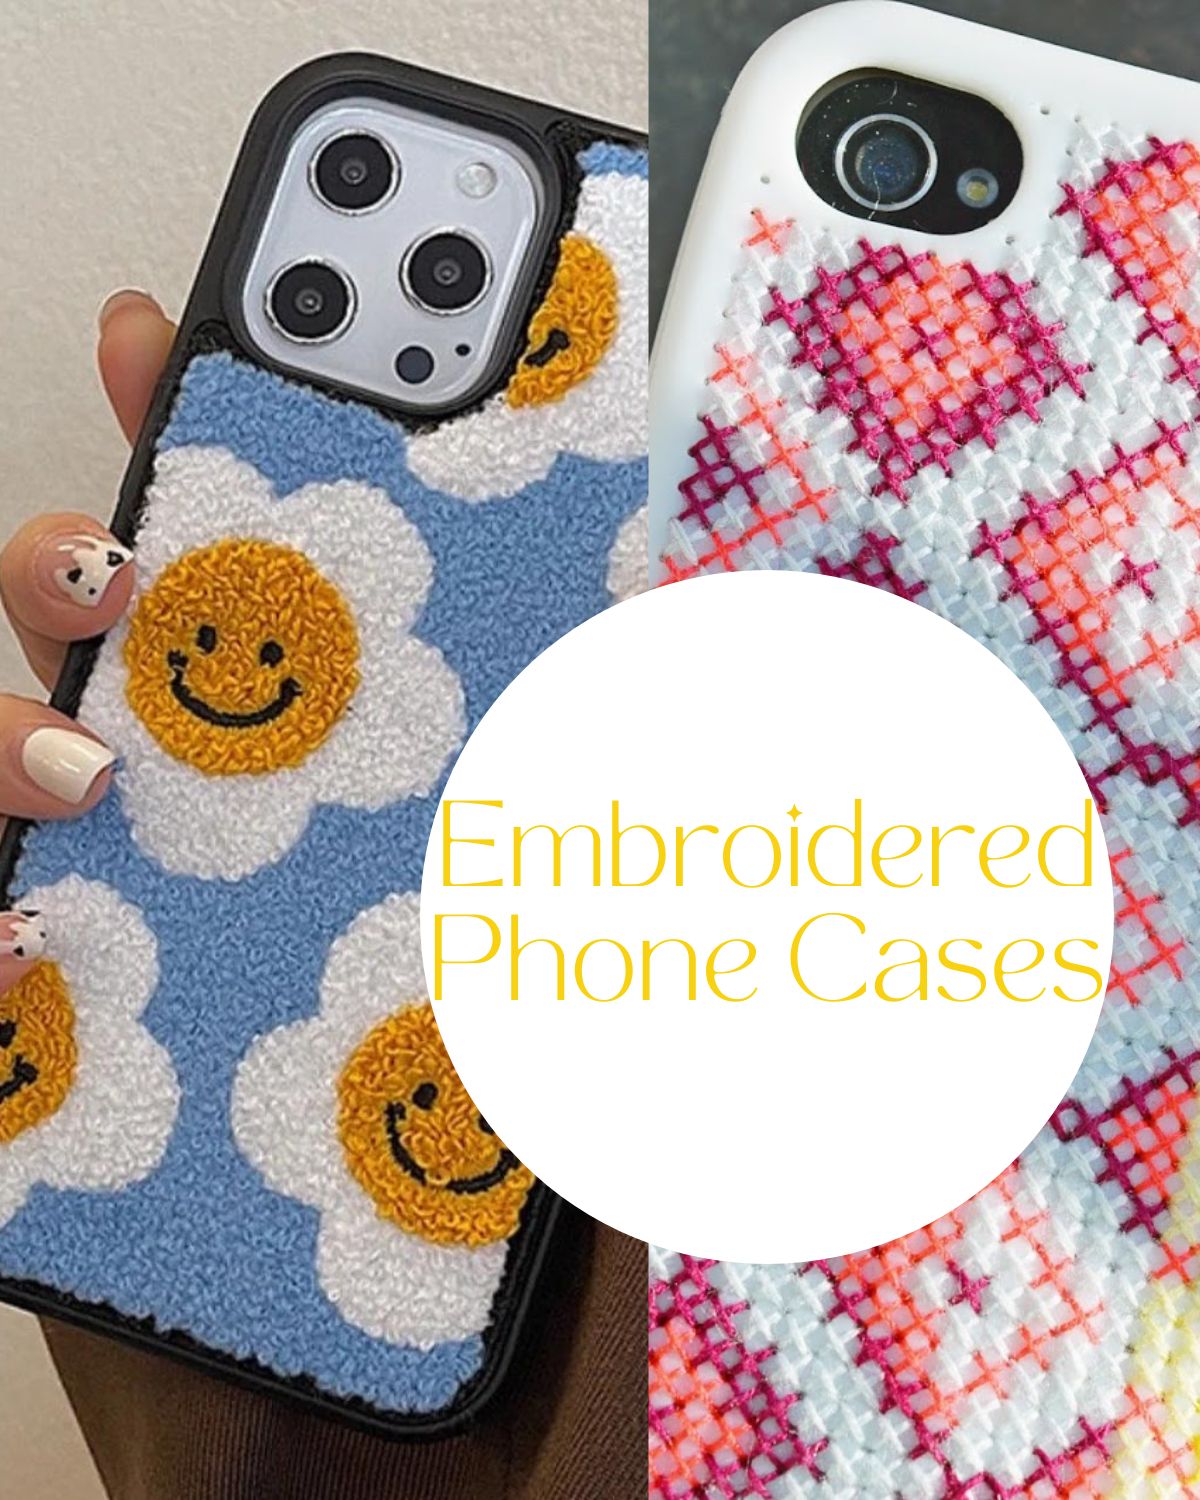 Two phone cases with cute stitched patterns